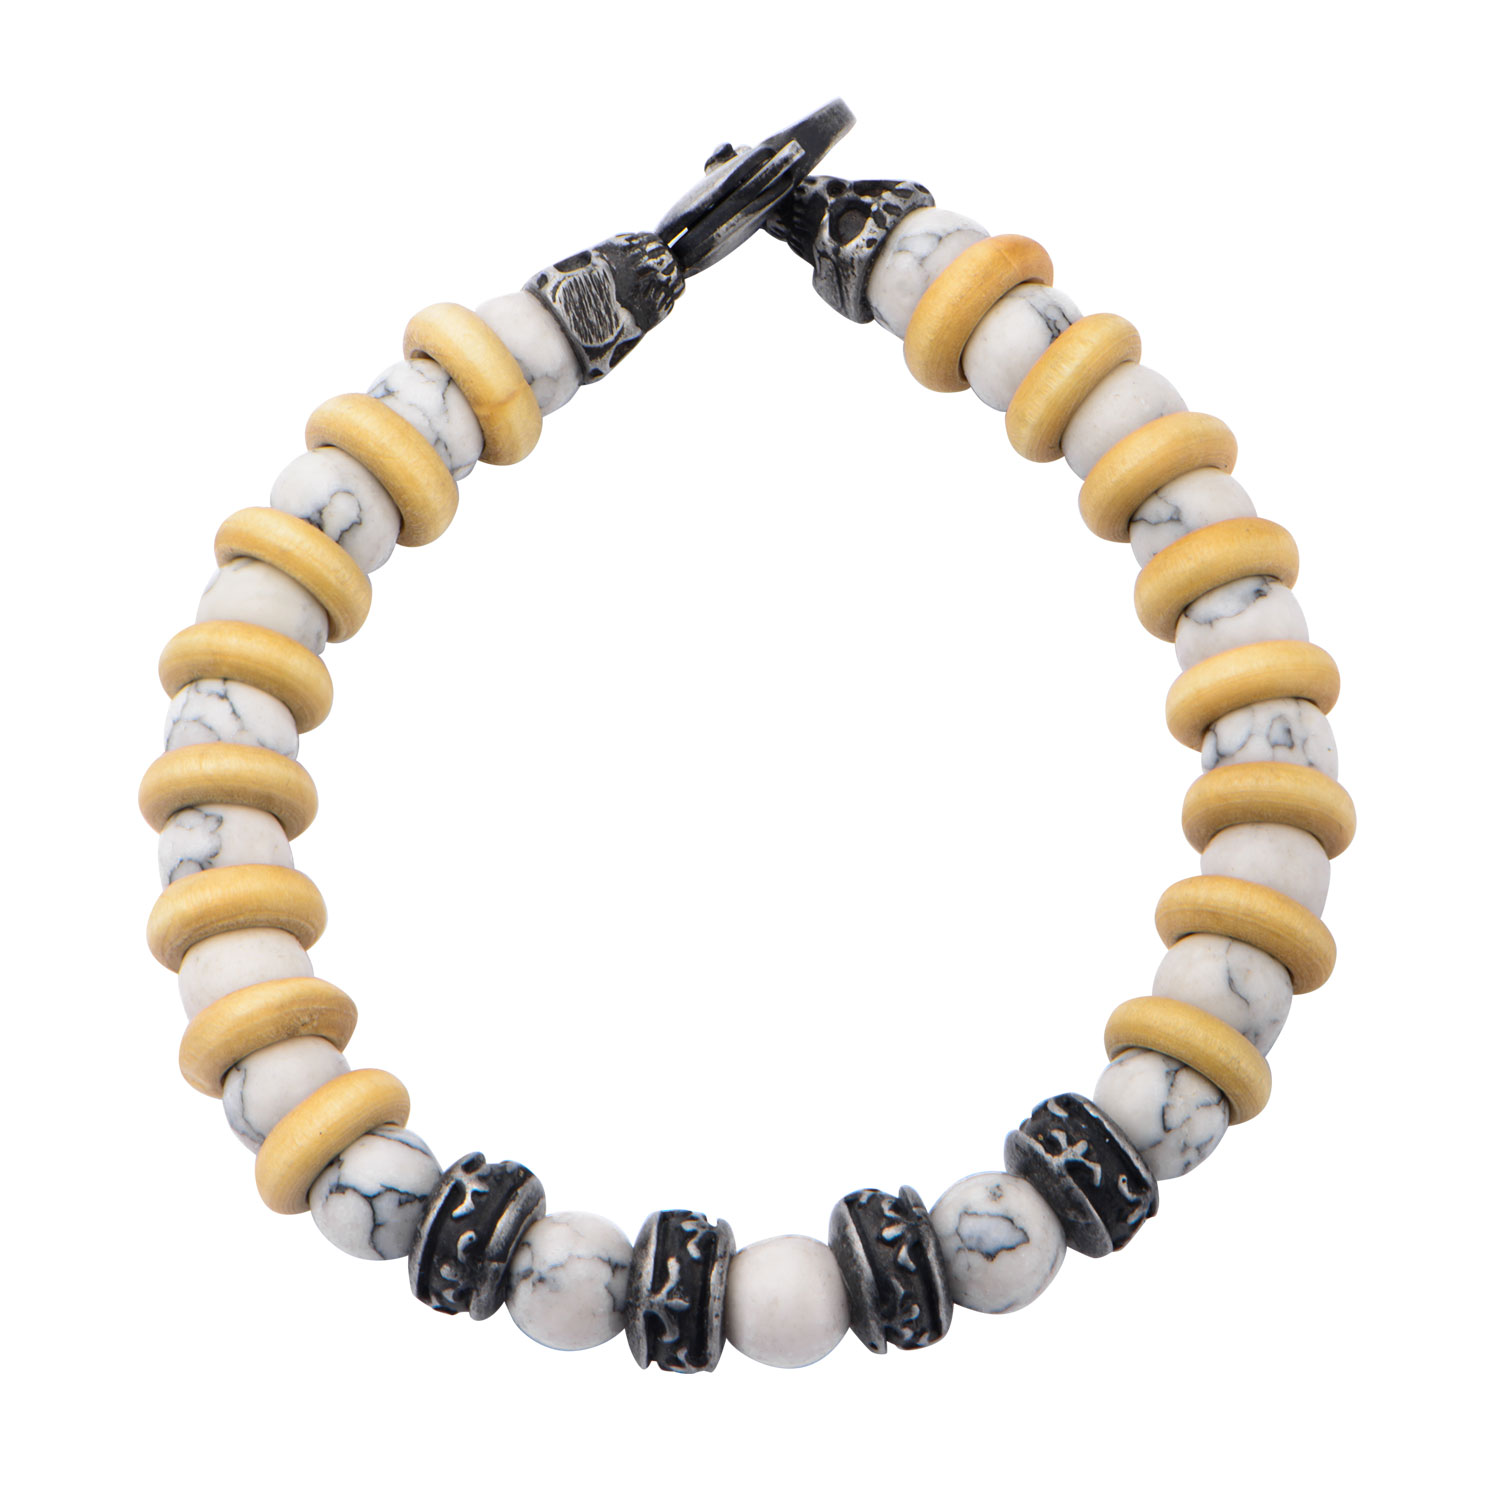 8mm White Howlite Beads with Taupe Wood Separators Bracelet Image 4 Morin Jewelers Southbridge, MA